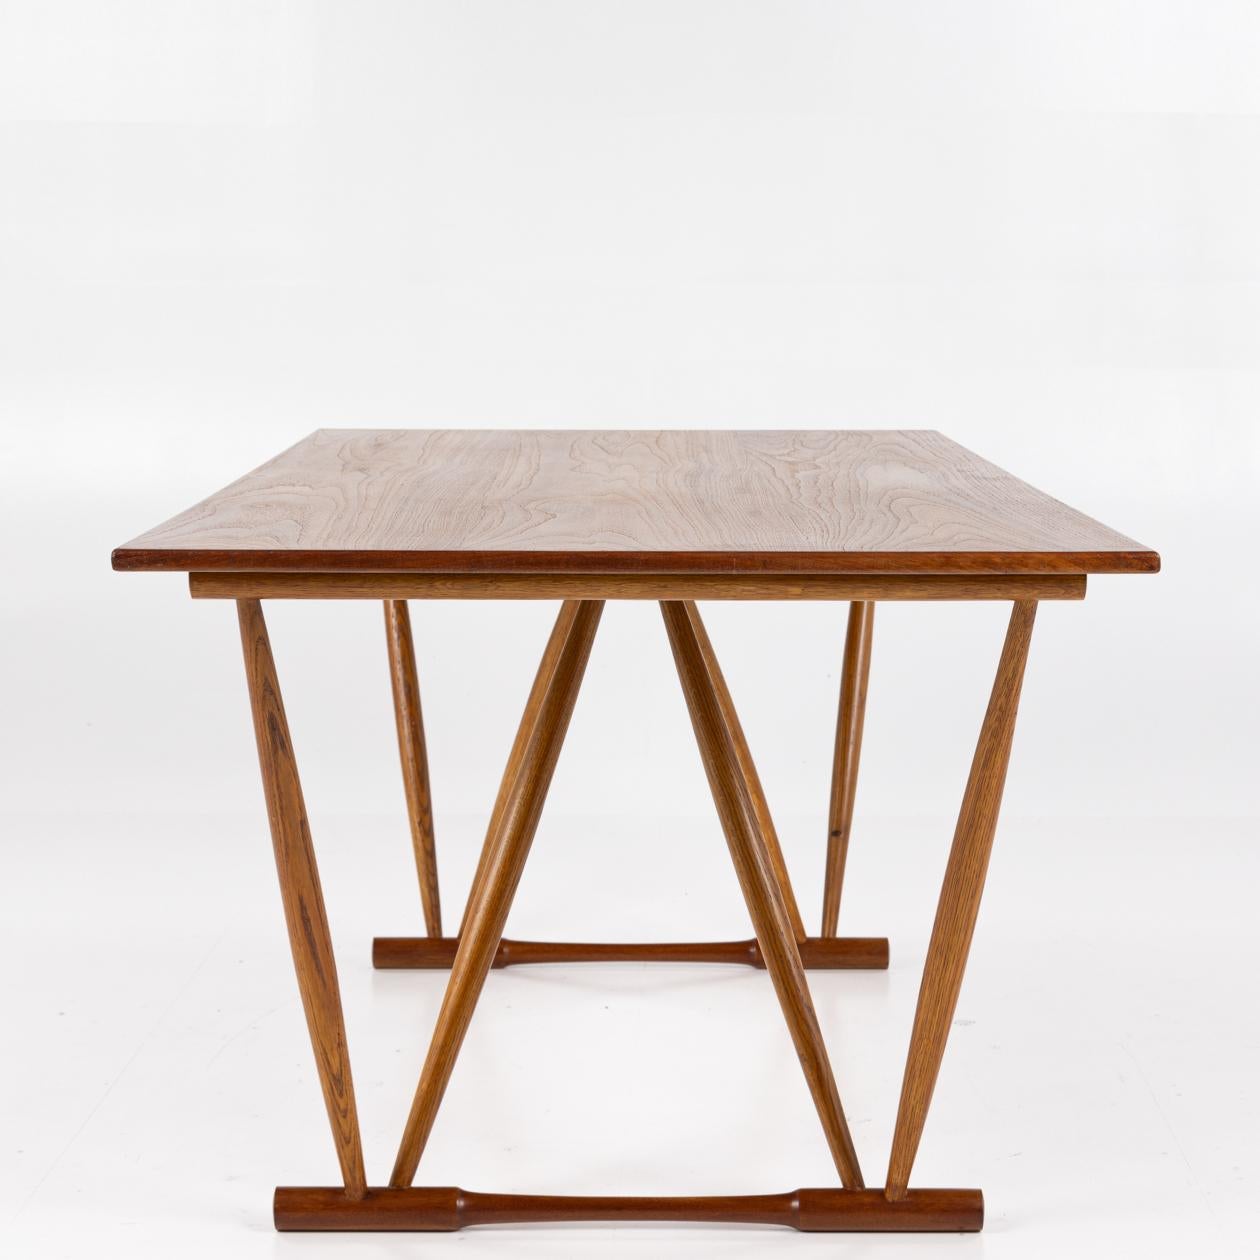 Sculptural work/dining table in teak and V-shaped legs in oak. Designed in 1944. Frode Hom / Illums Bolighus